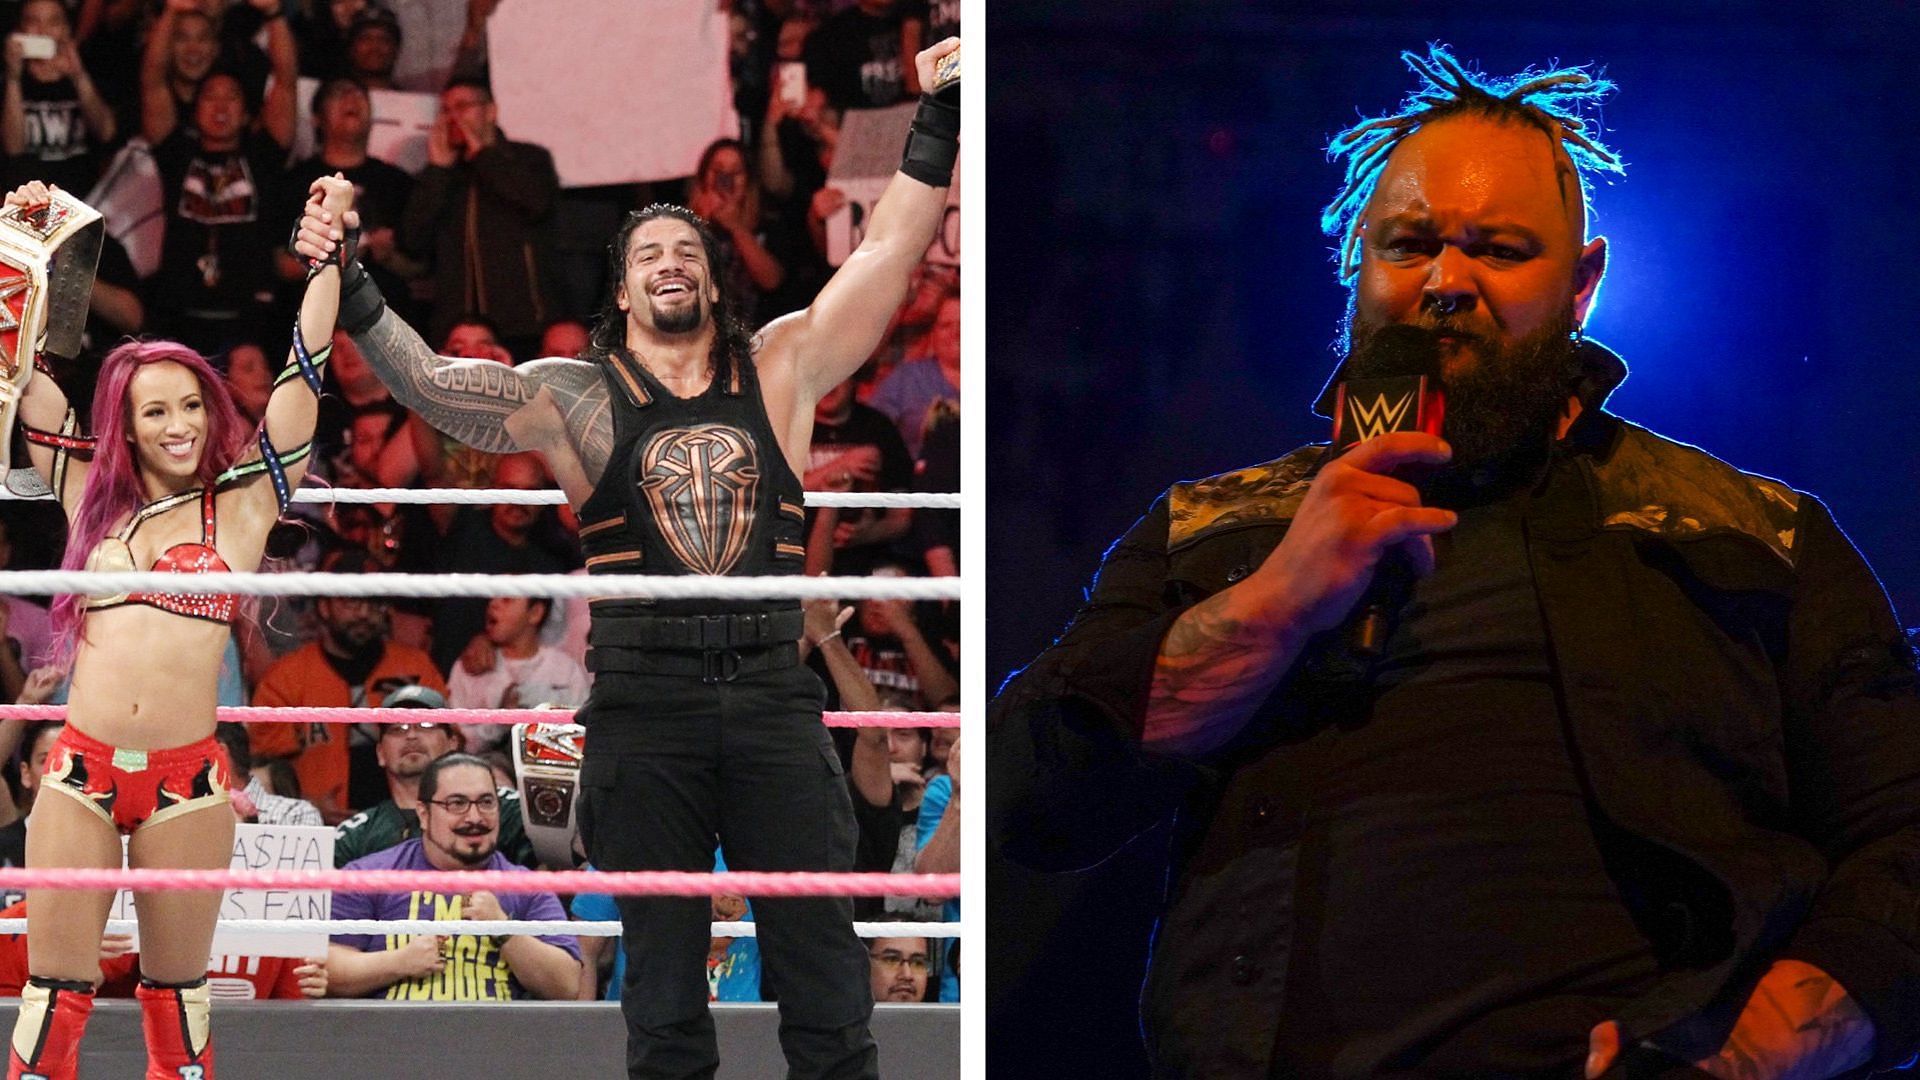 Roman Reigns has had some surprising partners in WWE